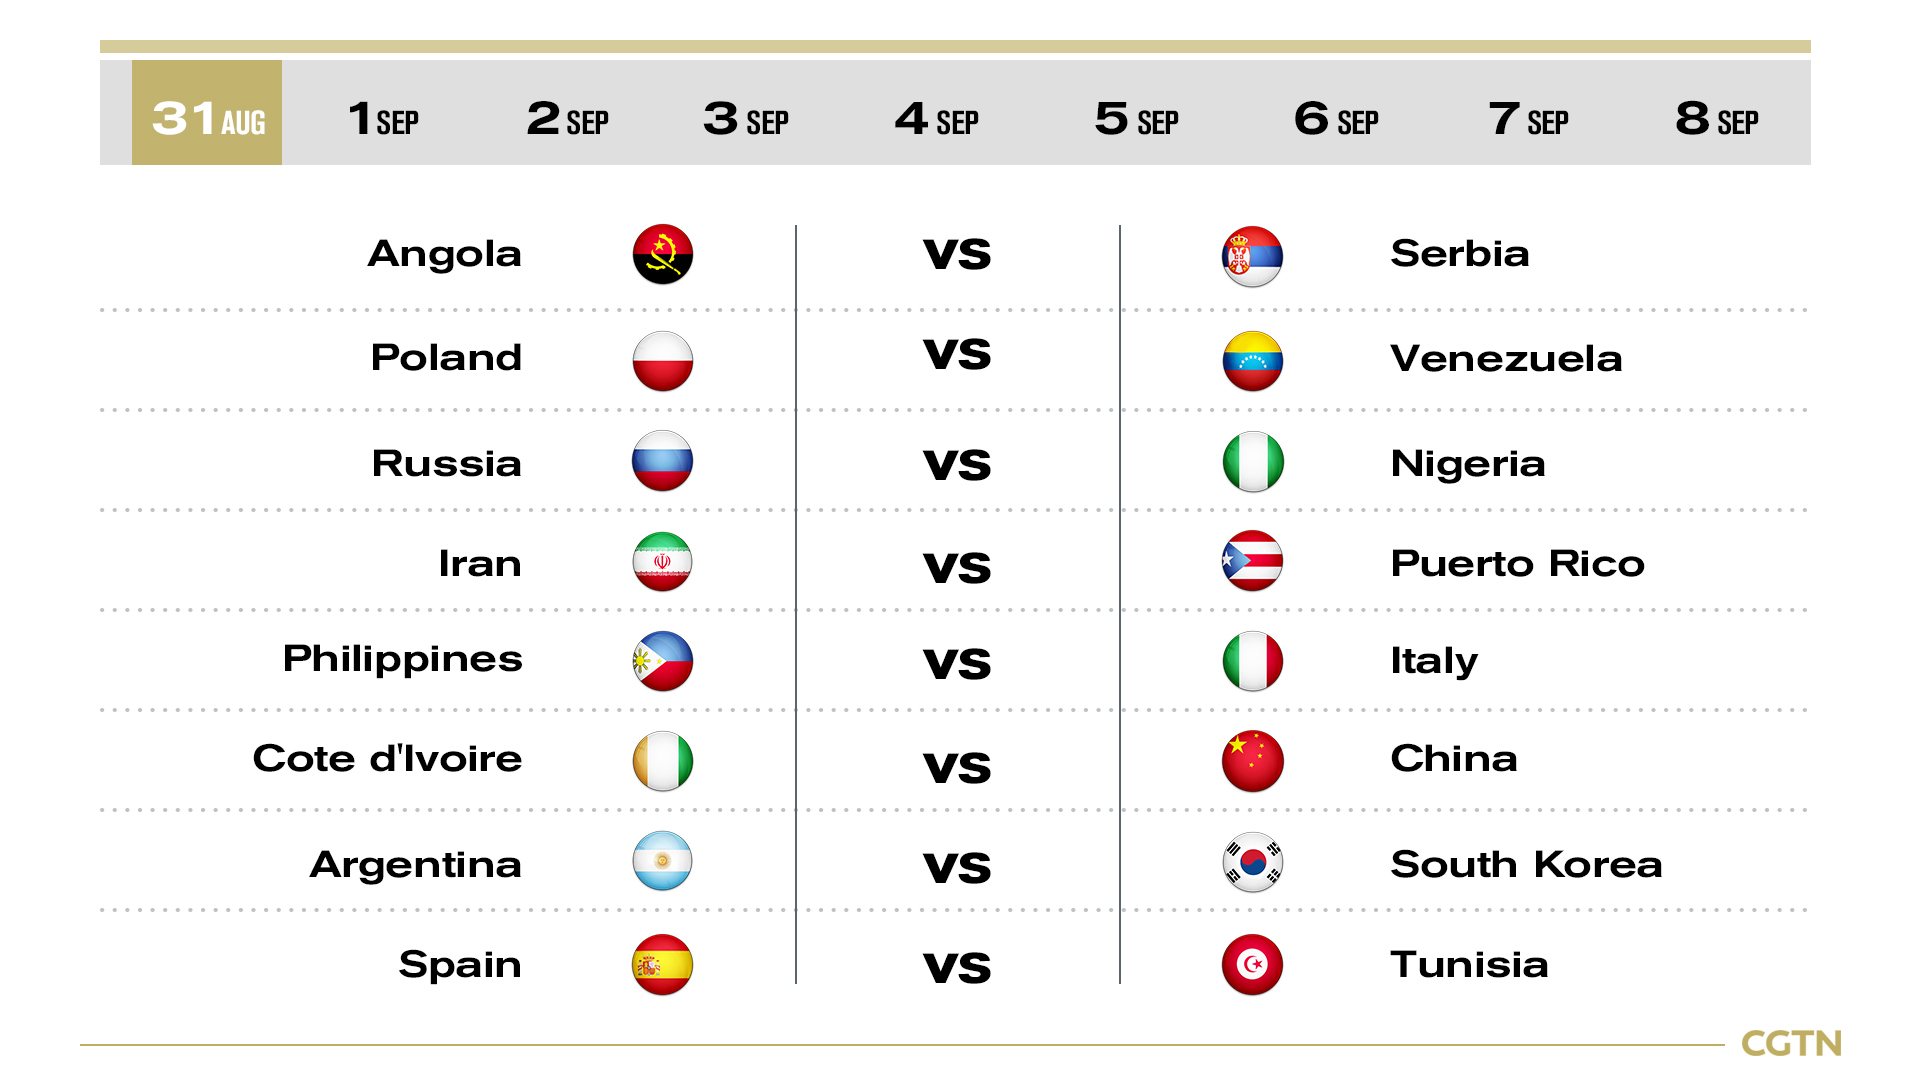 A specific game schedule for FIBA Basketball World Cup CGTN